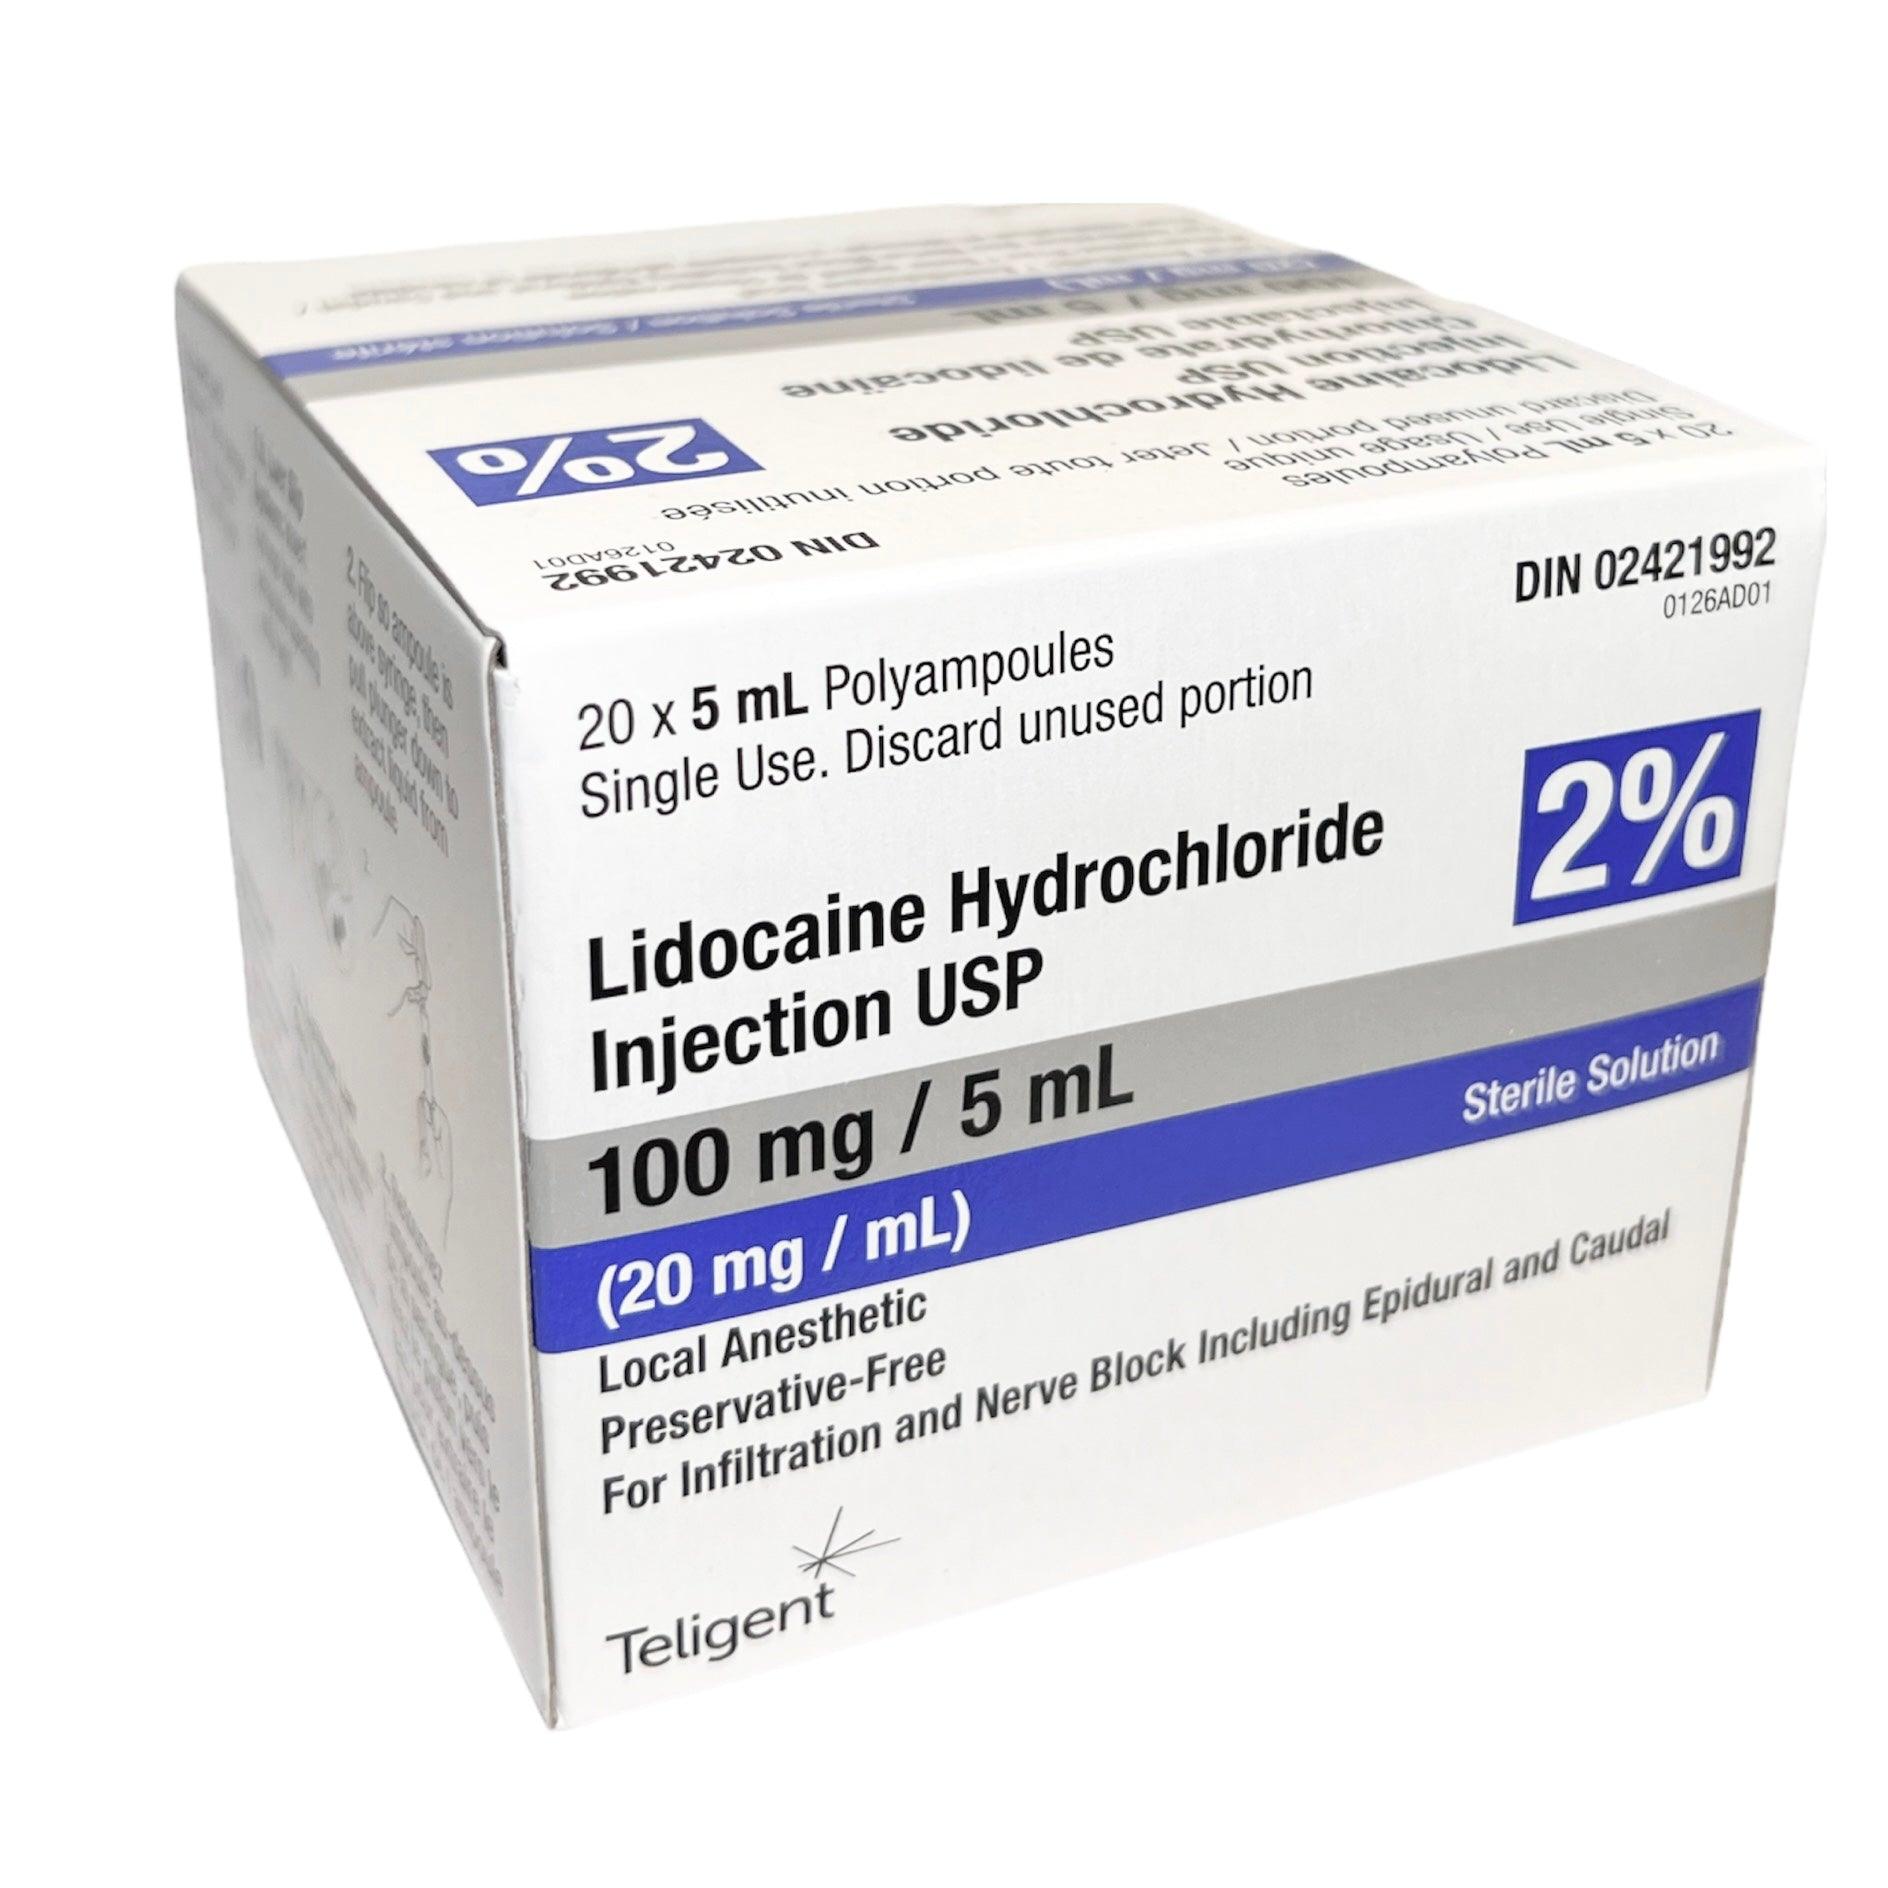 Lidocaine Hydrochloride Injection USP 2% Local Anesthetic 5mL Polyampoules (20 vials)